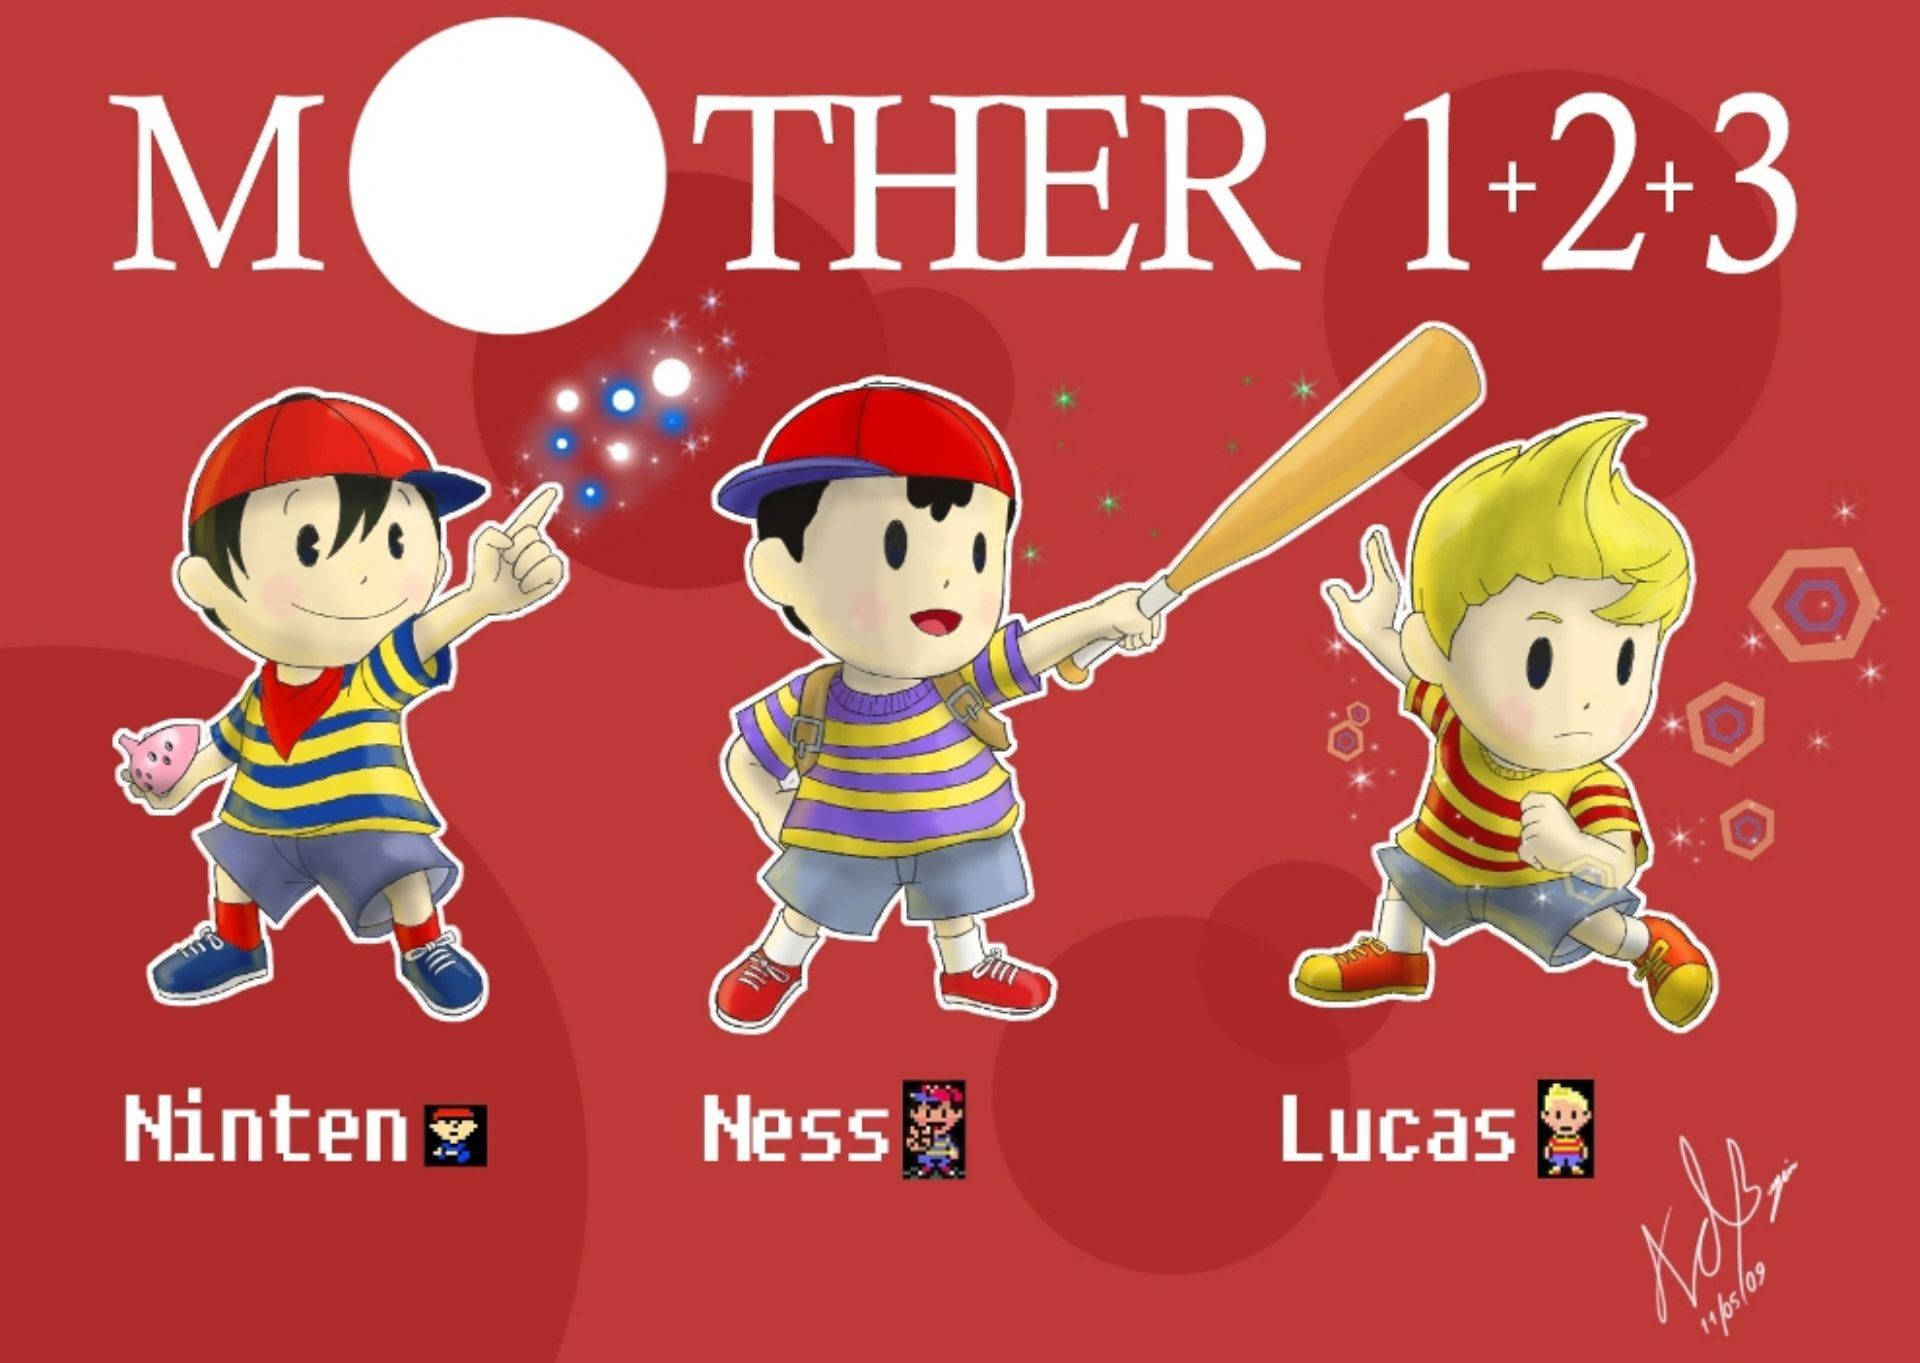 Earthbound Mother 1+2+3 Poster